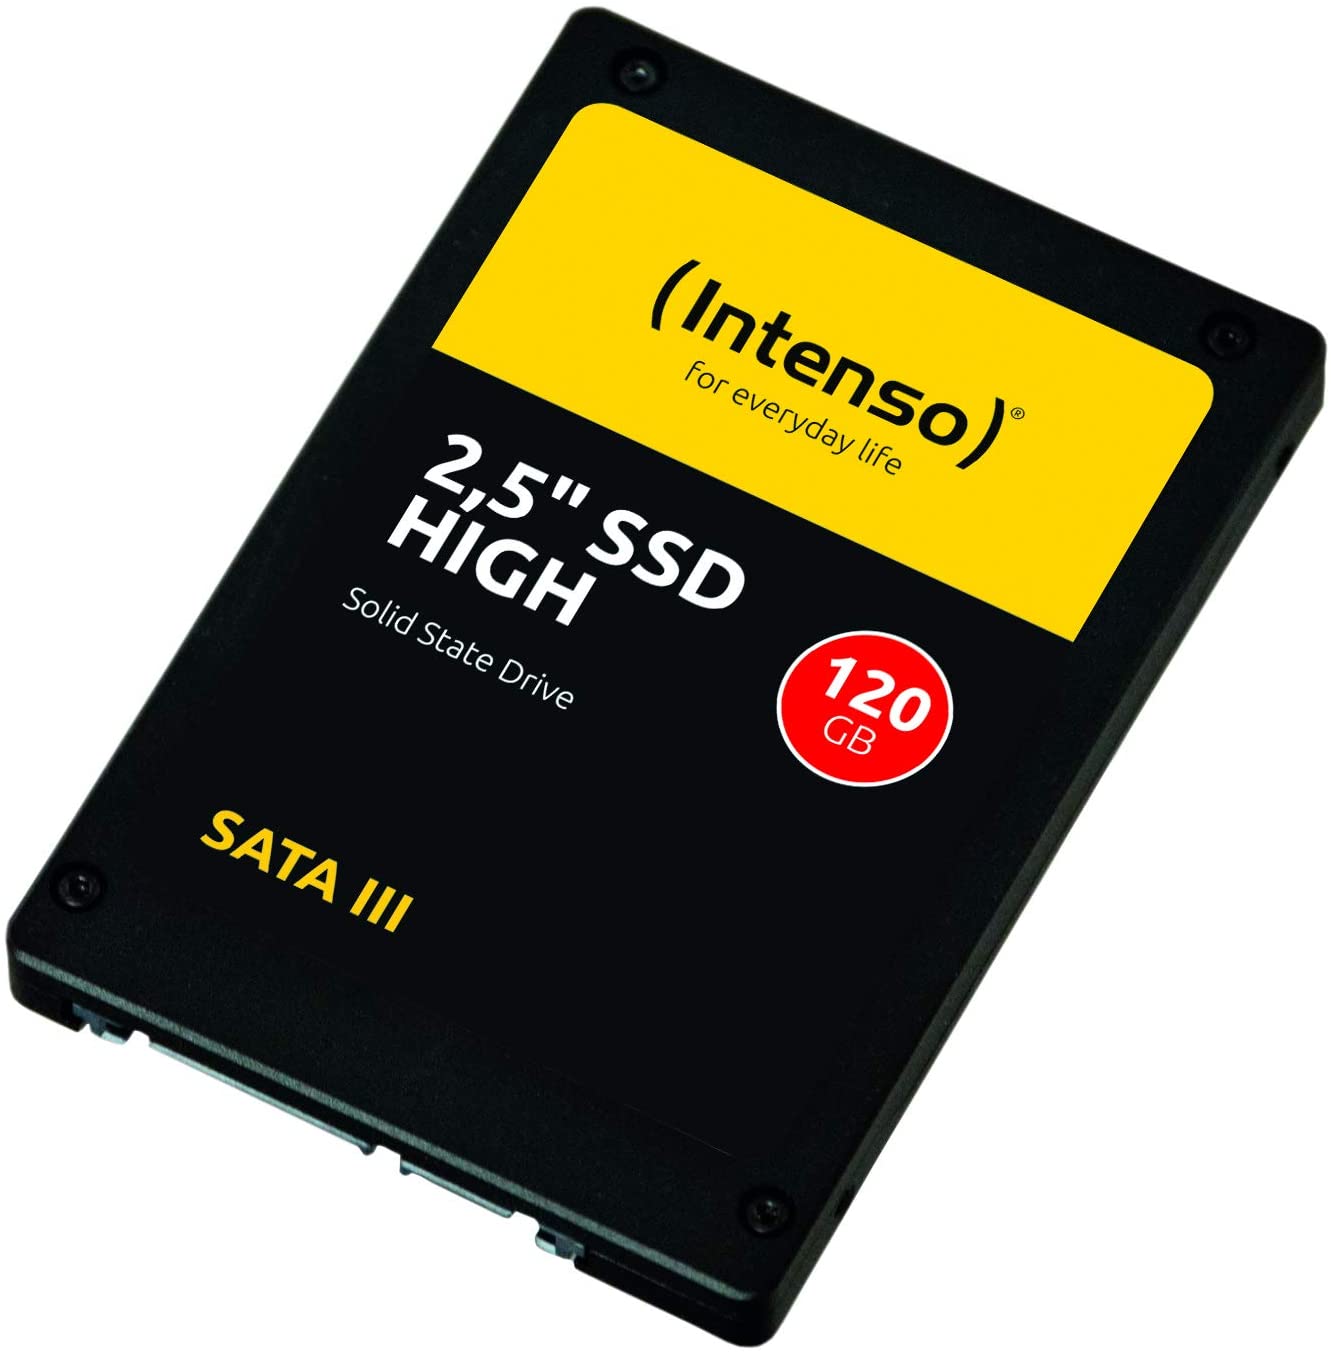 SSD INTENSO 120GB HIGT PERFORMANCE 520Mb/S